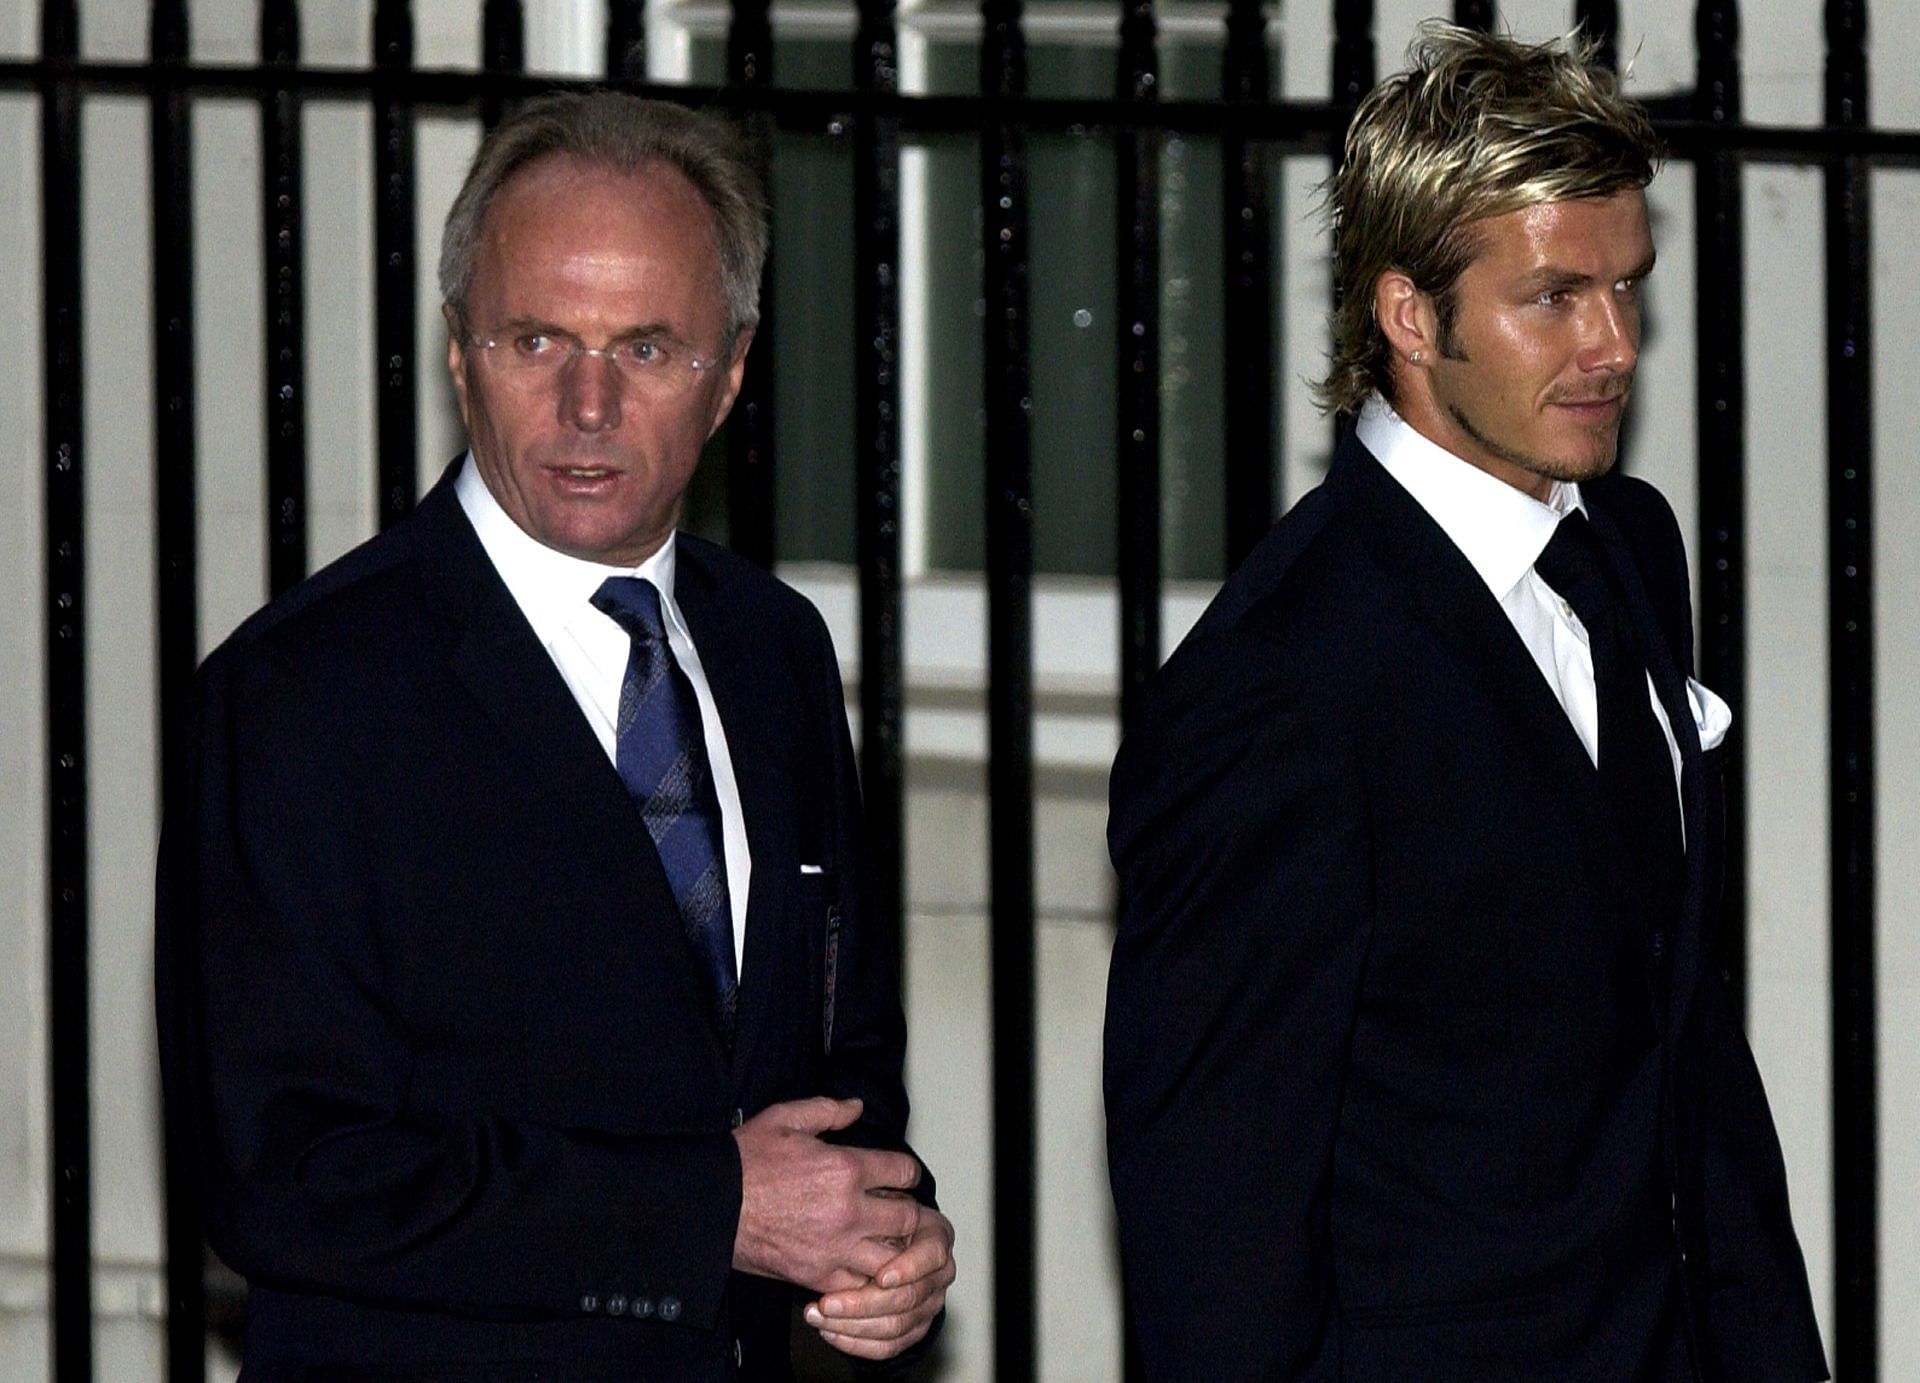 Sven-Goran Eriksson led David Beckham and his team in the 2002 World Cup (Image via Getty Images)